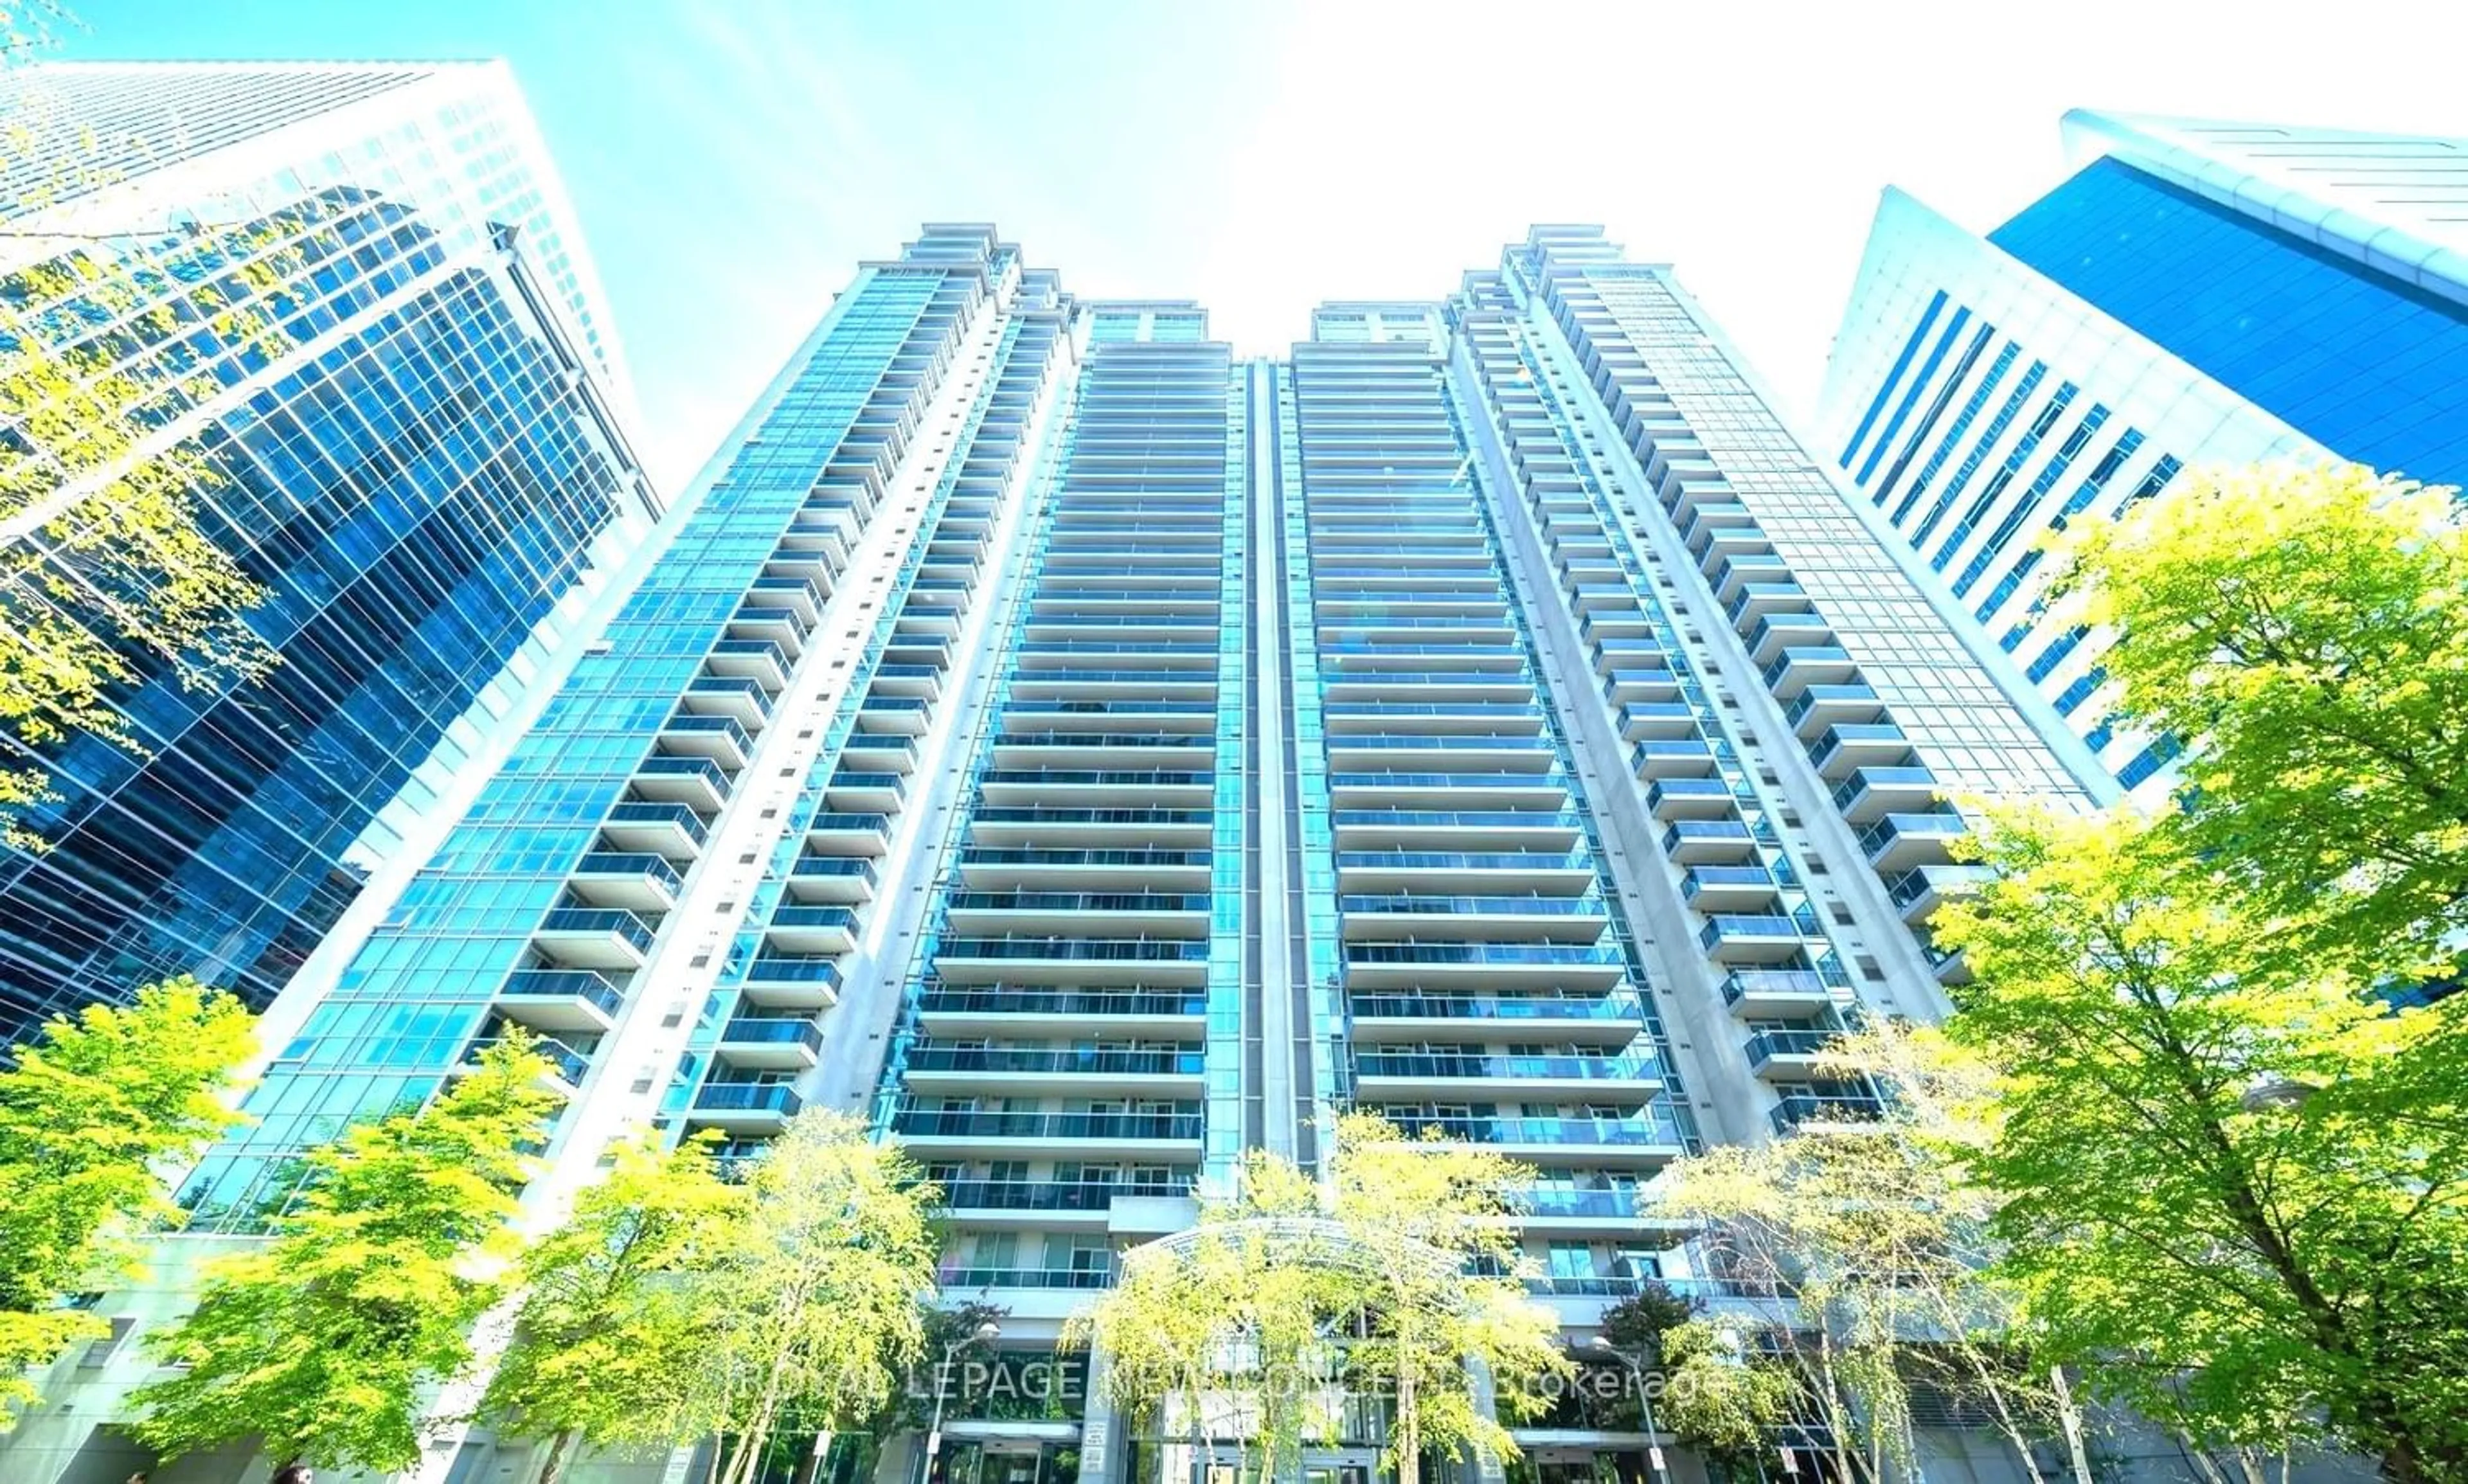 A pic from exterior of the house or condo for 4978 Yonge St #507, Toronto Ontario M2N 7G8